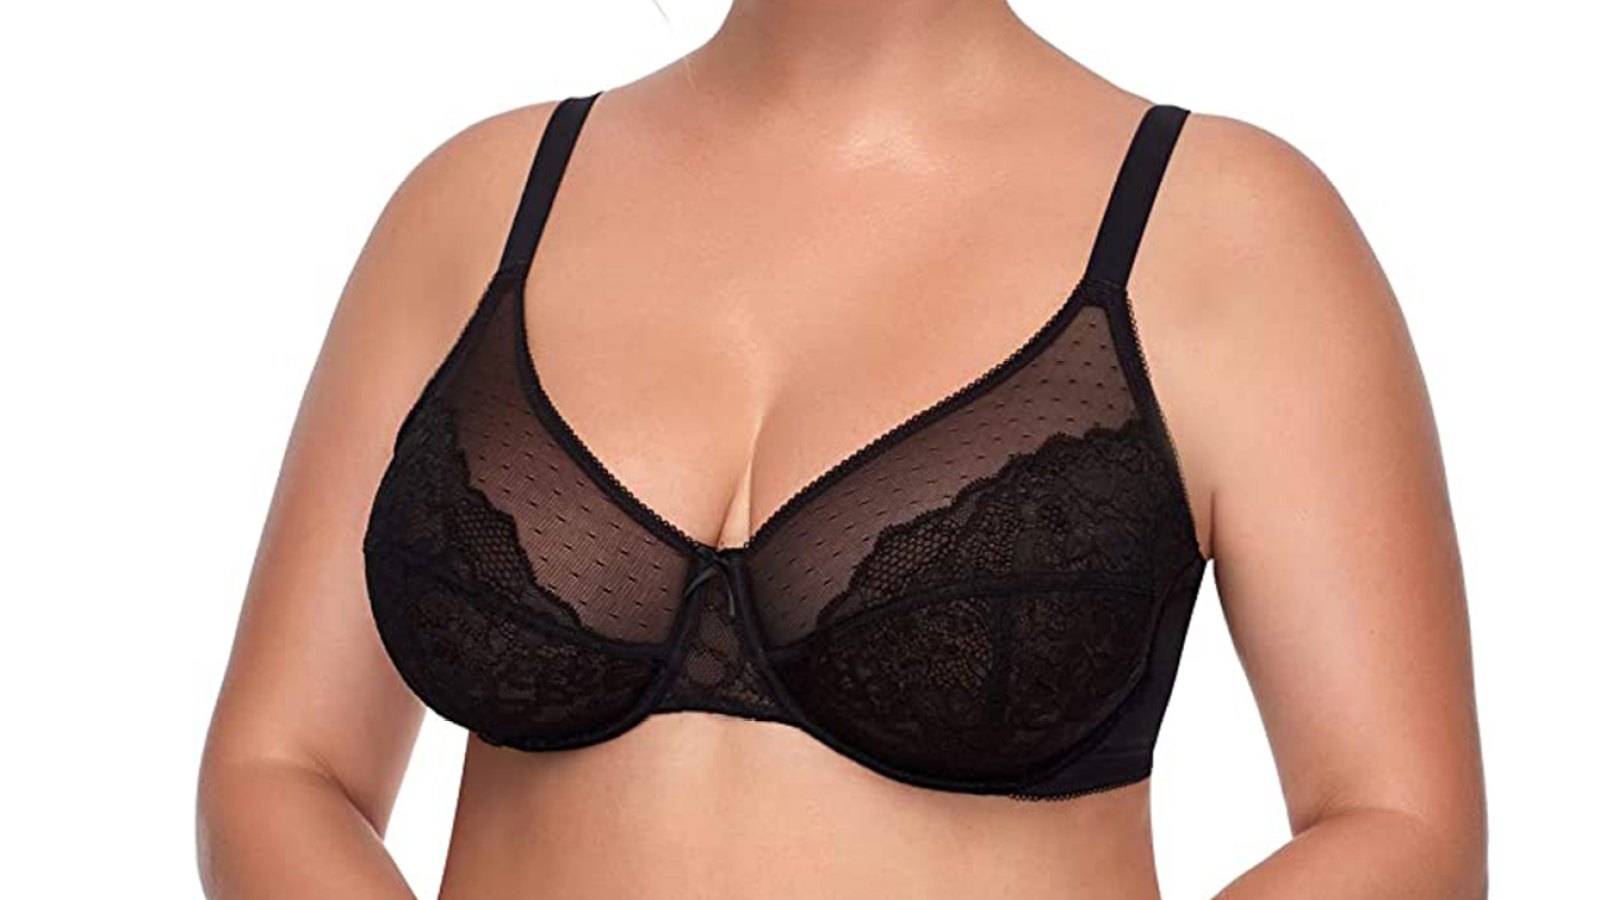 What Are Reducing Bras And When To Use Them?, by Bra Heaven